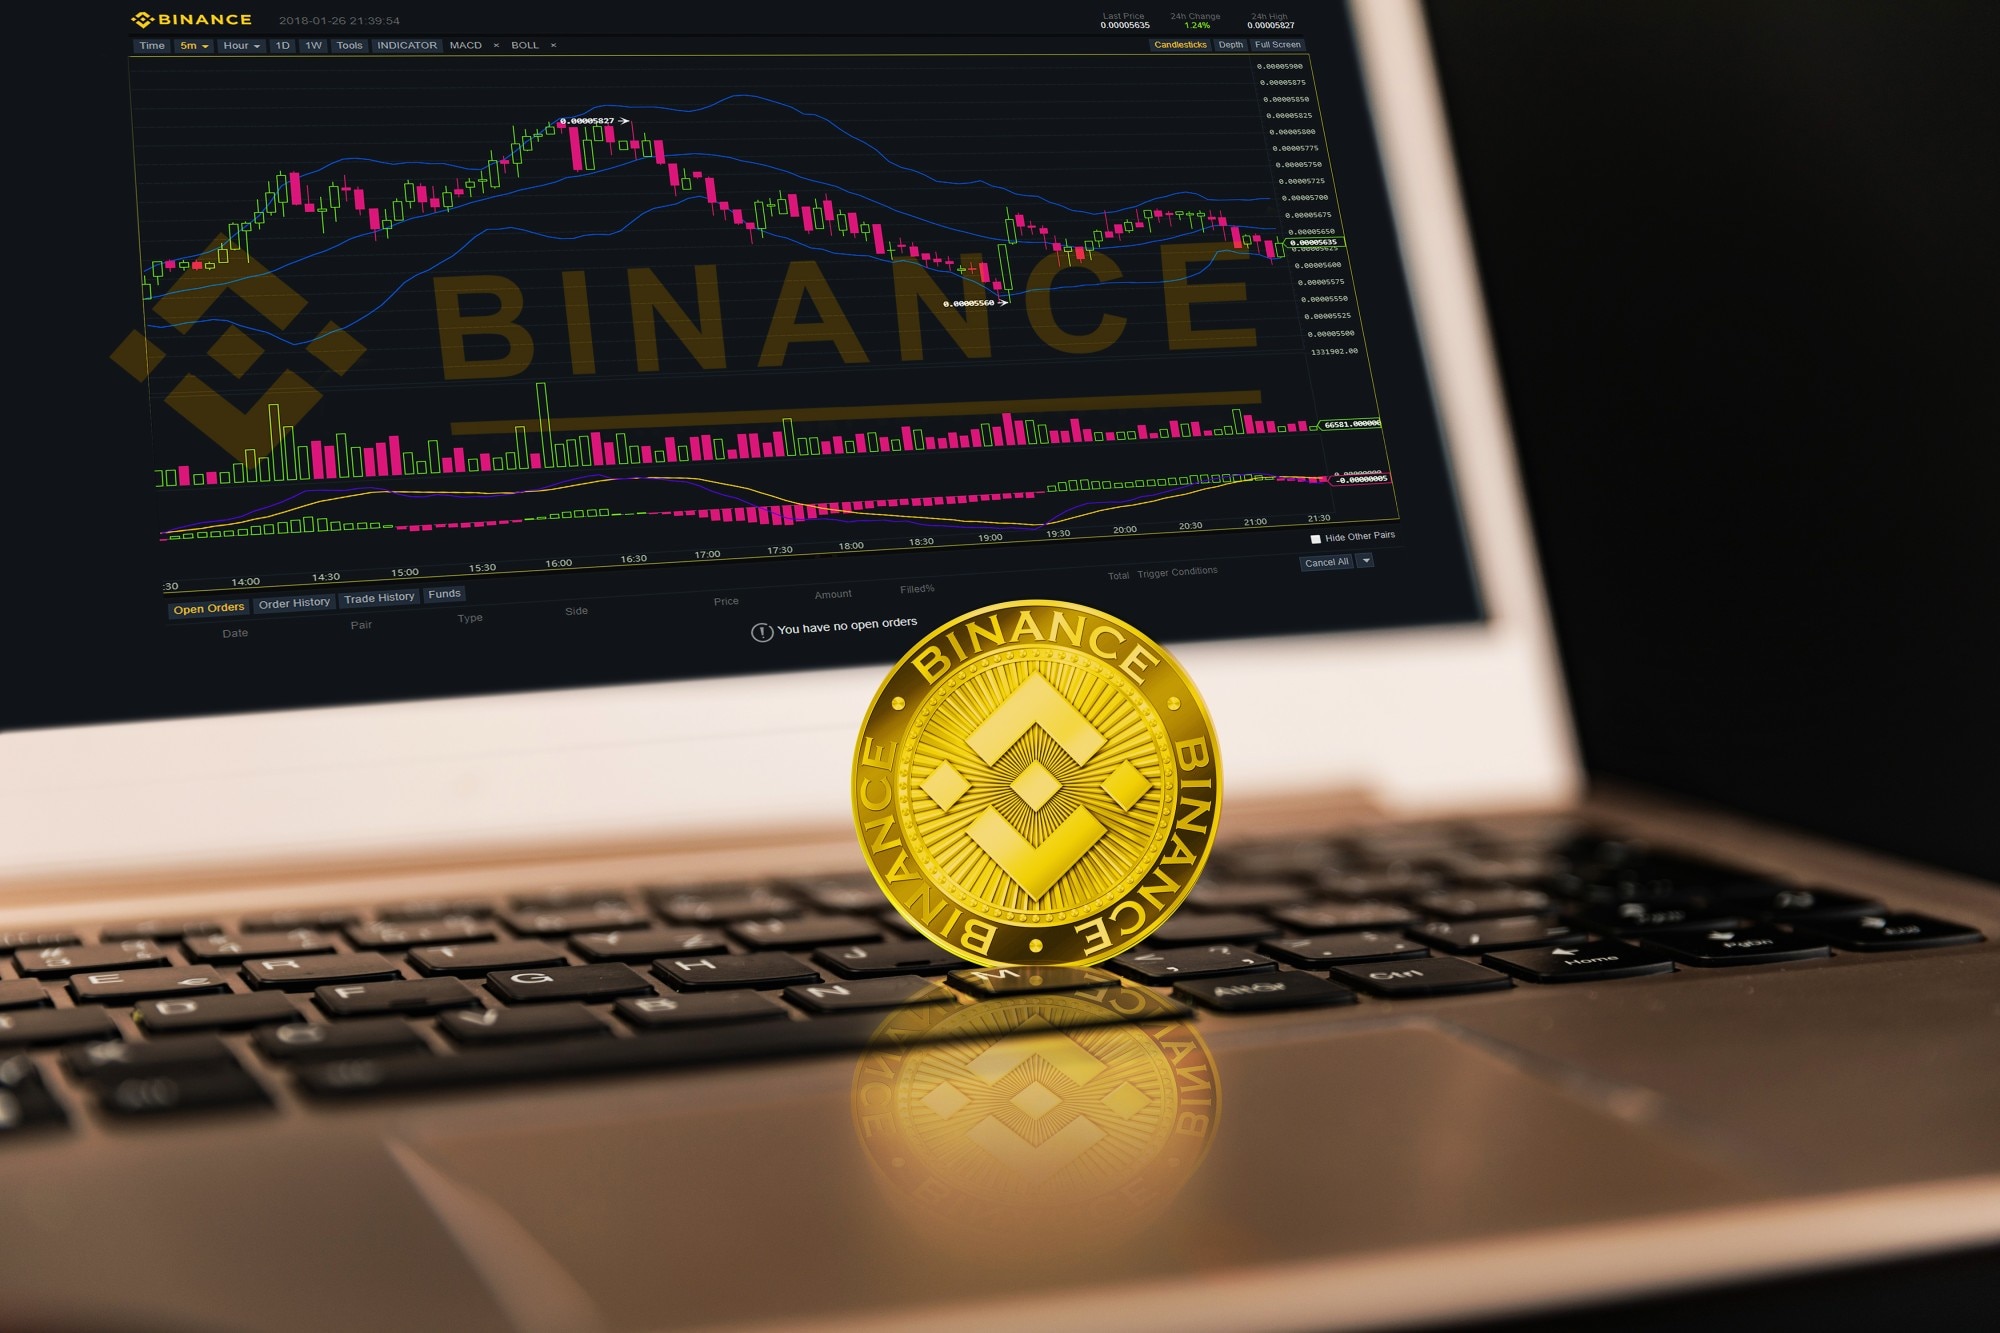  Binance Coin:  It was launched in 2017 by leading cryptocurrency exchange Binance, and largely did not pop up on crypto investors’ radar till it went parabolic on the price charts this year. Price: Rs 23,334.3. Mcap: USD 53 billion; YTD: 704.9%.